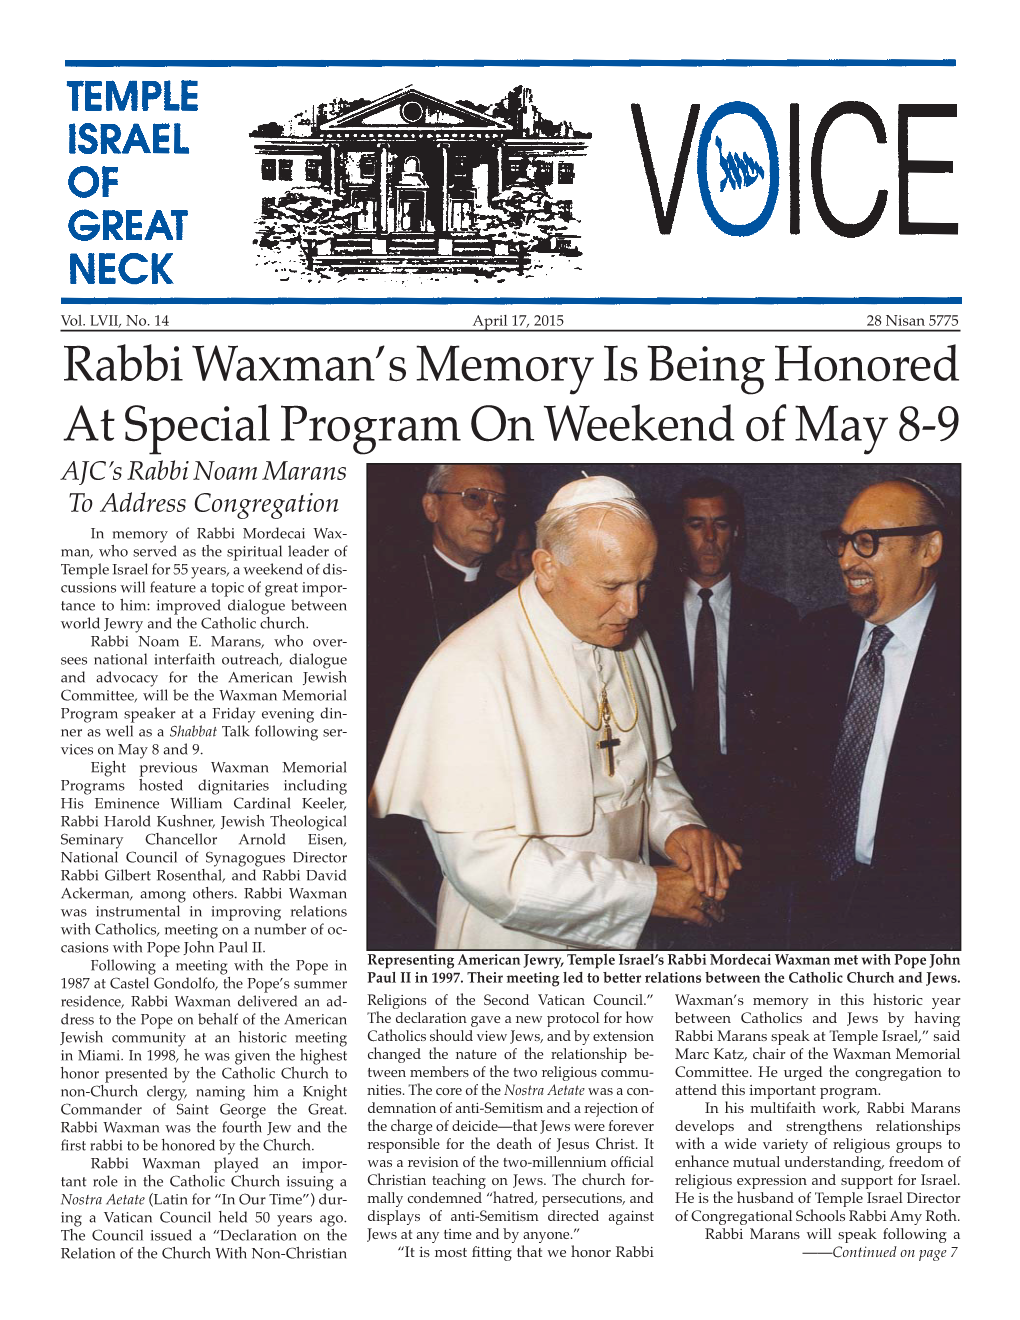 Rabbi Waxman's Memory Is Being Honored at Special Program On